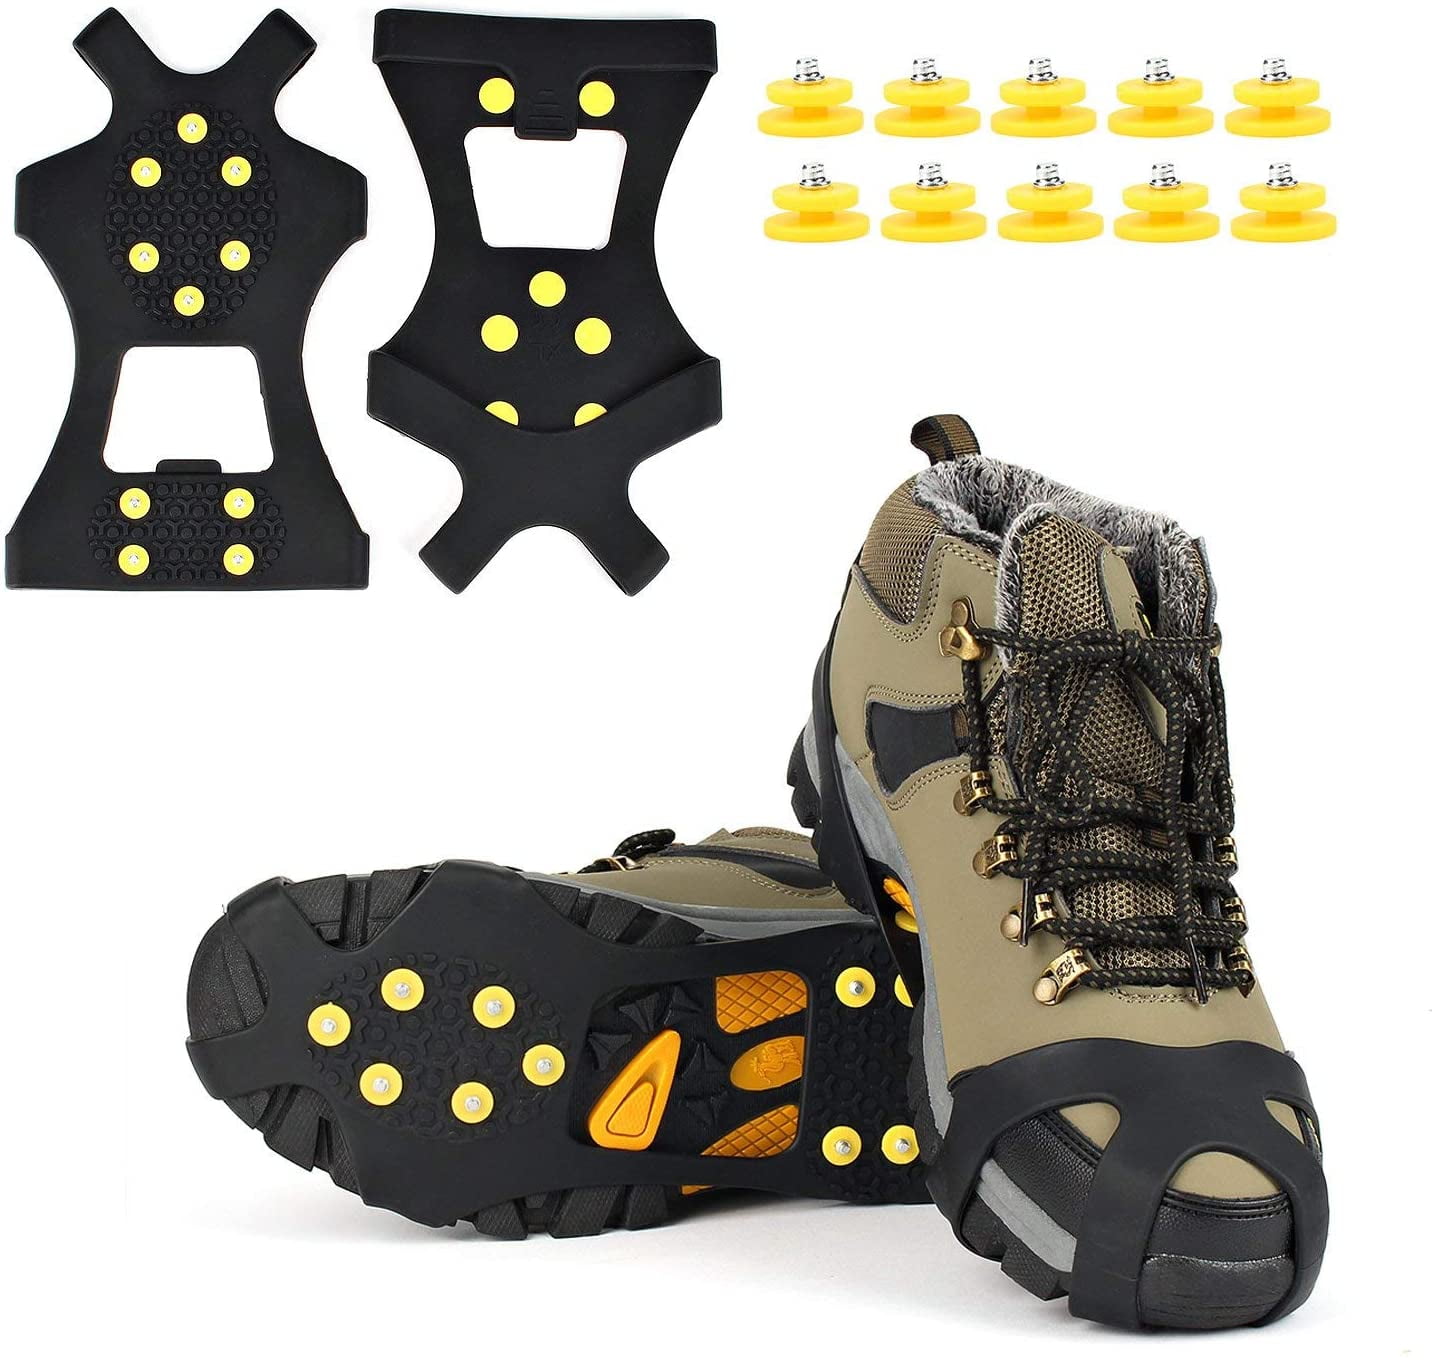 Grips Grippers Crampon Cleats For Shoe Boots Overshoe Ice Snow Anti Slip Spikes 